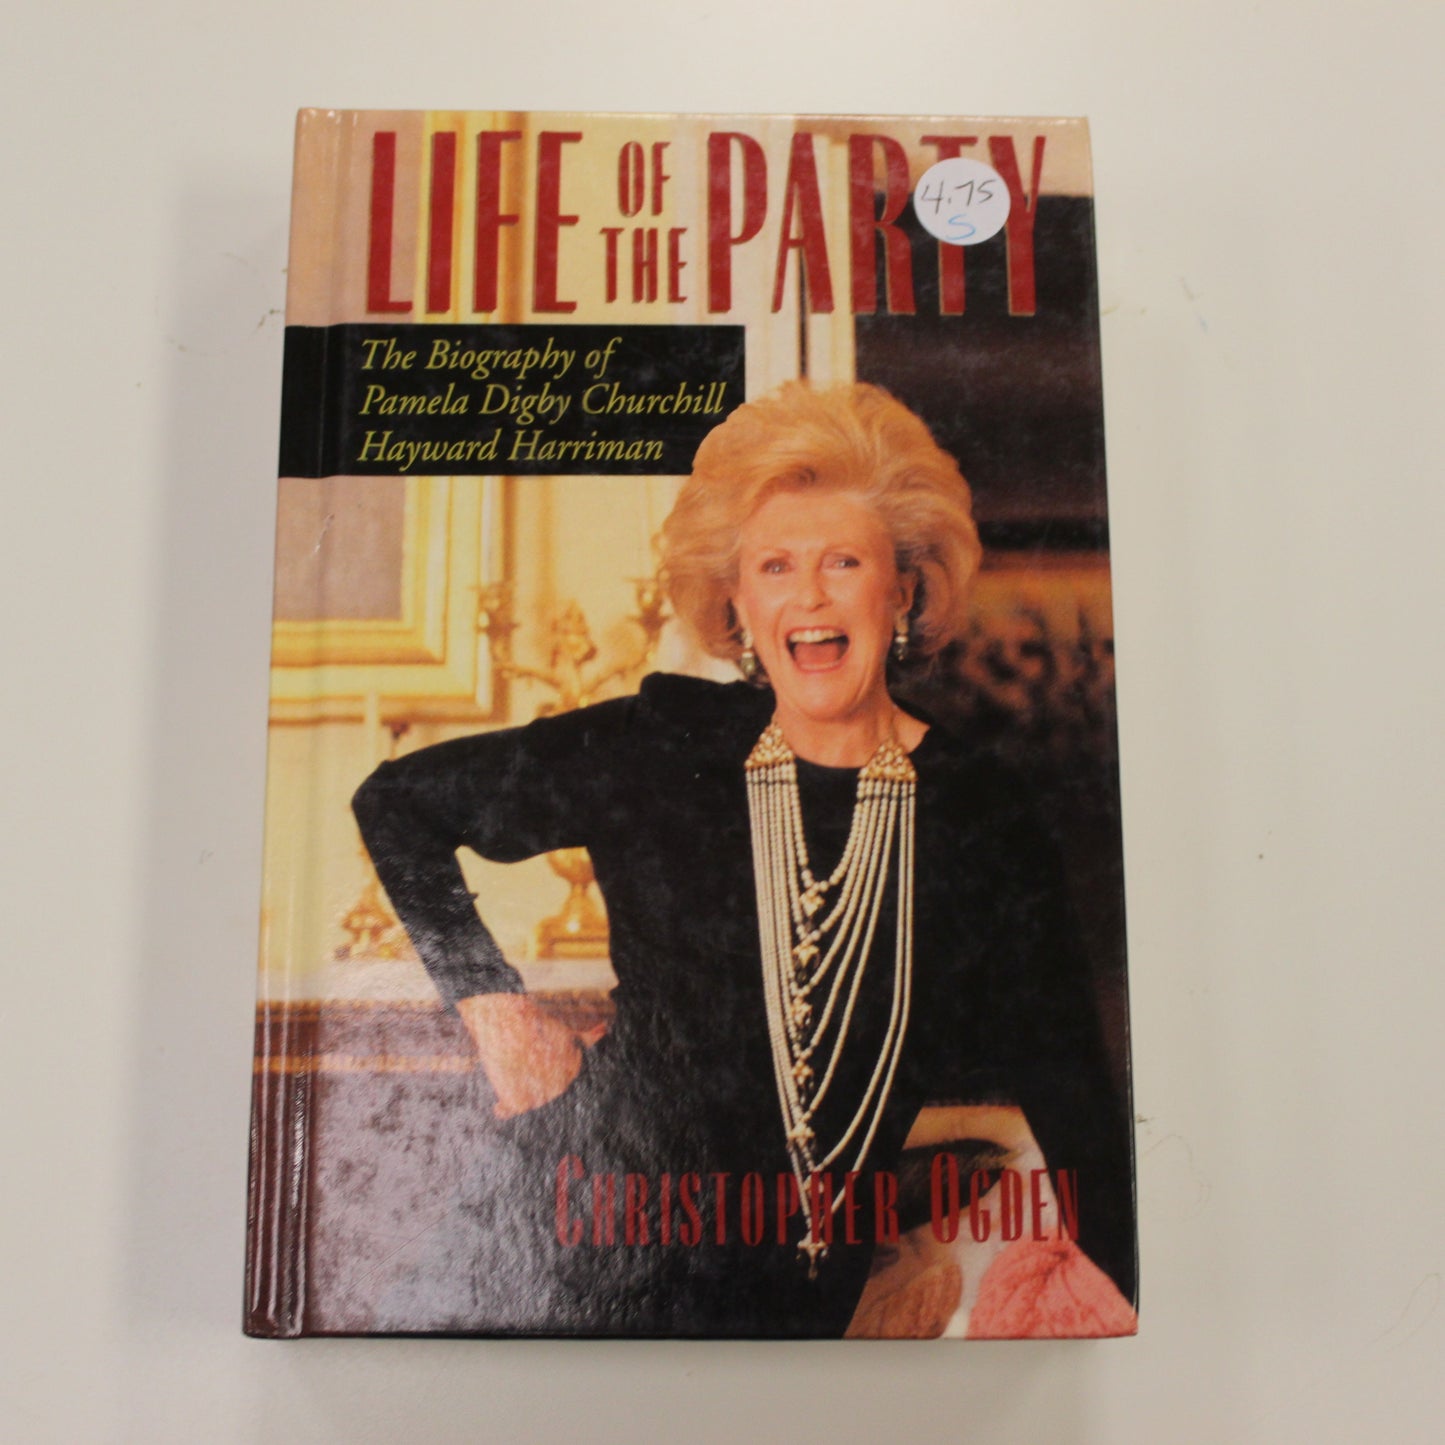 LIFE OF THE PARTY THE BIOGRAPHY OF PAMELA DIGBY CHURCHILL HAYWARD HARRIMAN